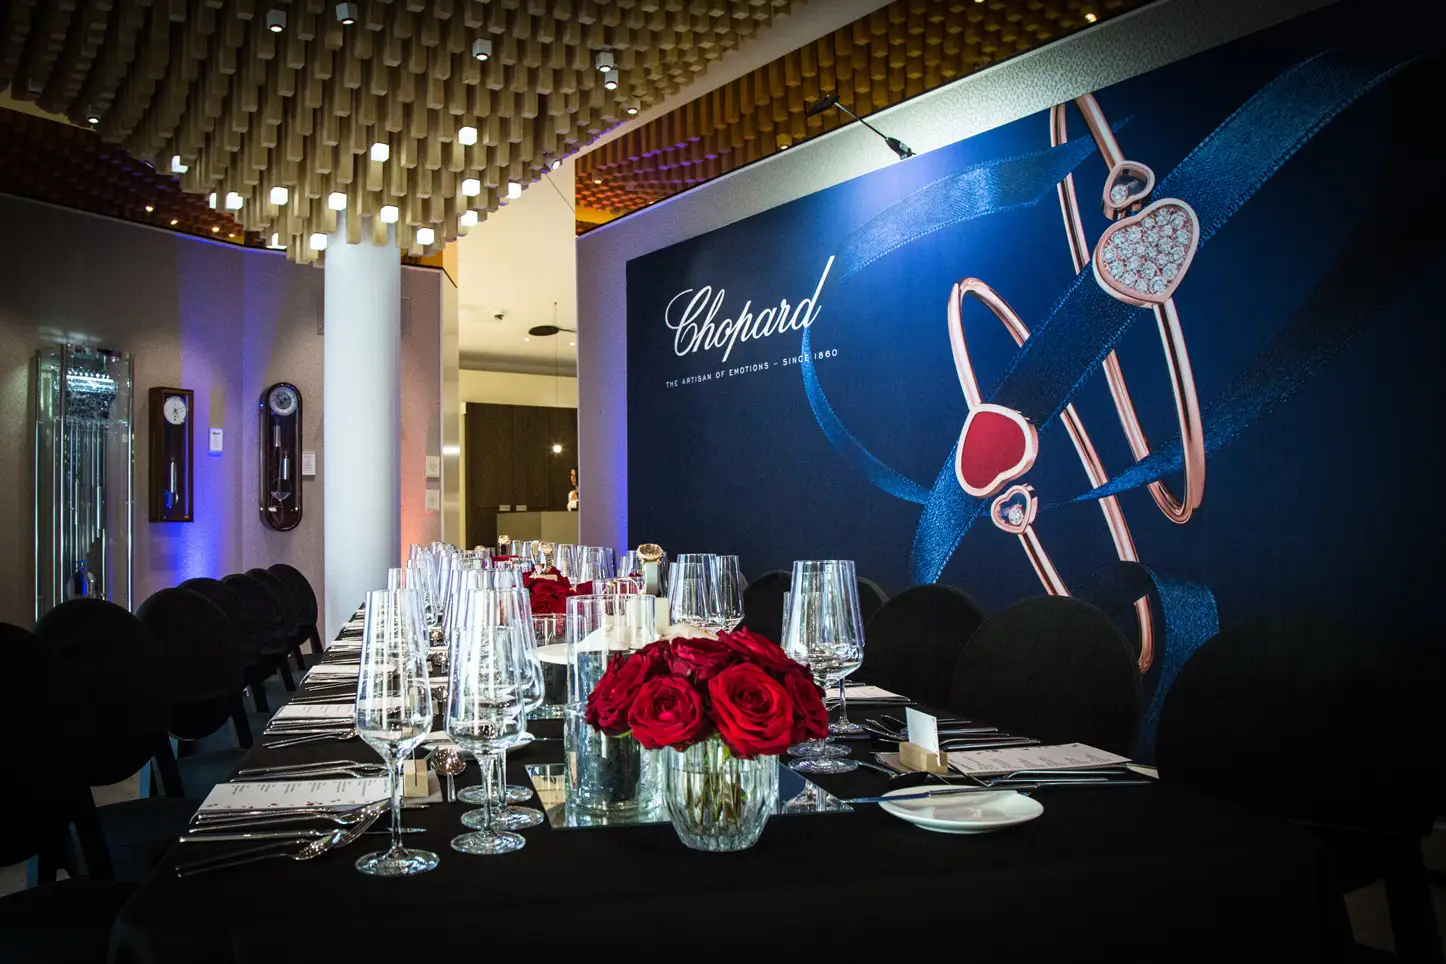  Chopard Event 14.02.23 bei Drubba Moments 8